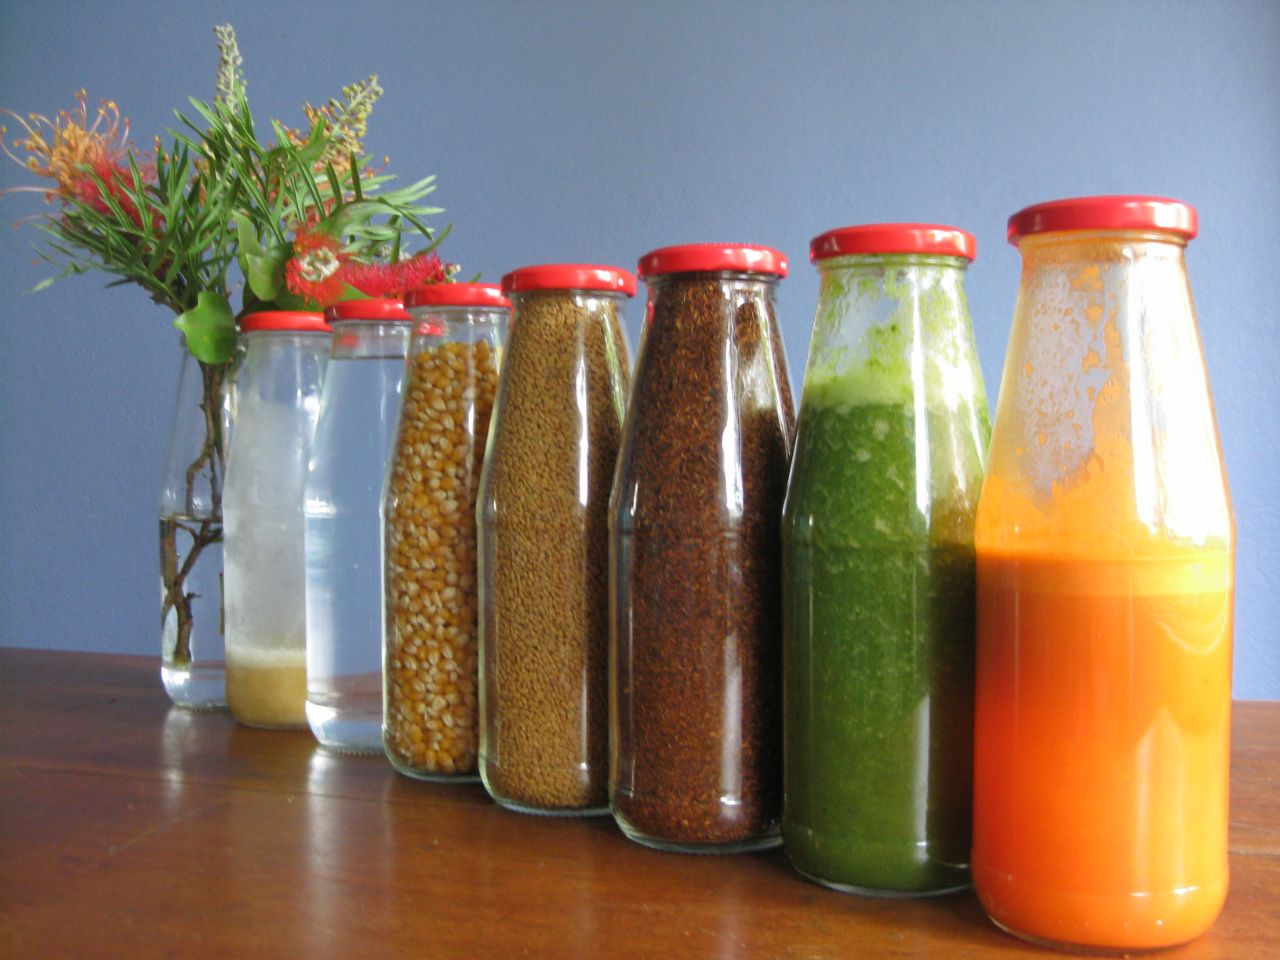 glass passata bottles being reused for different purposes - angled line